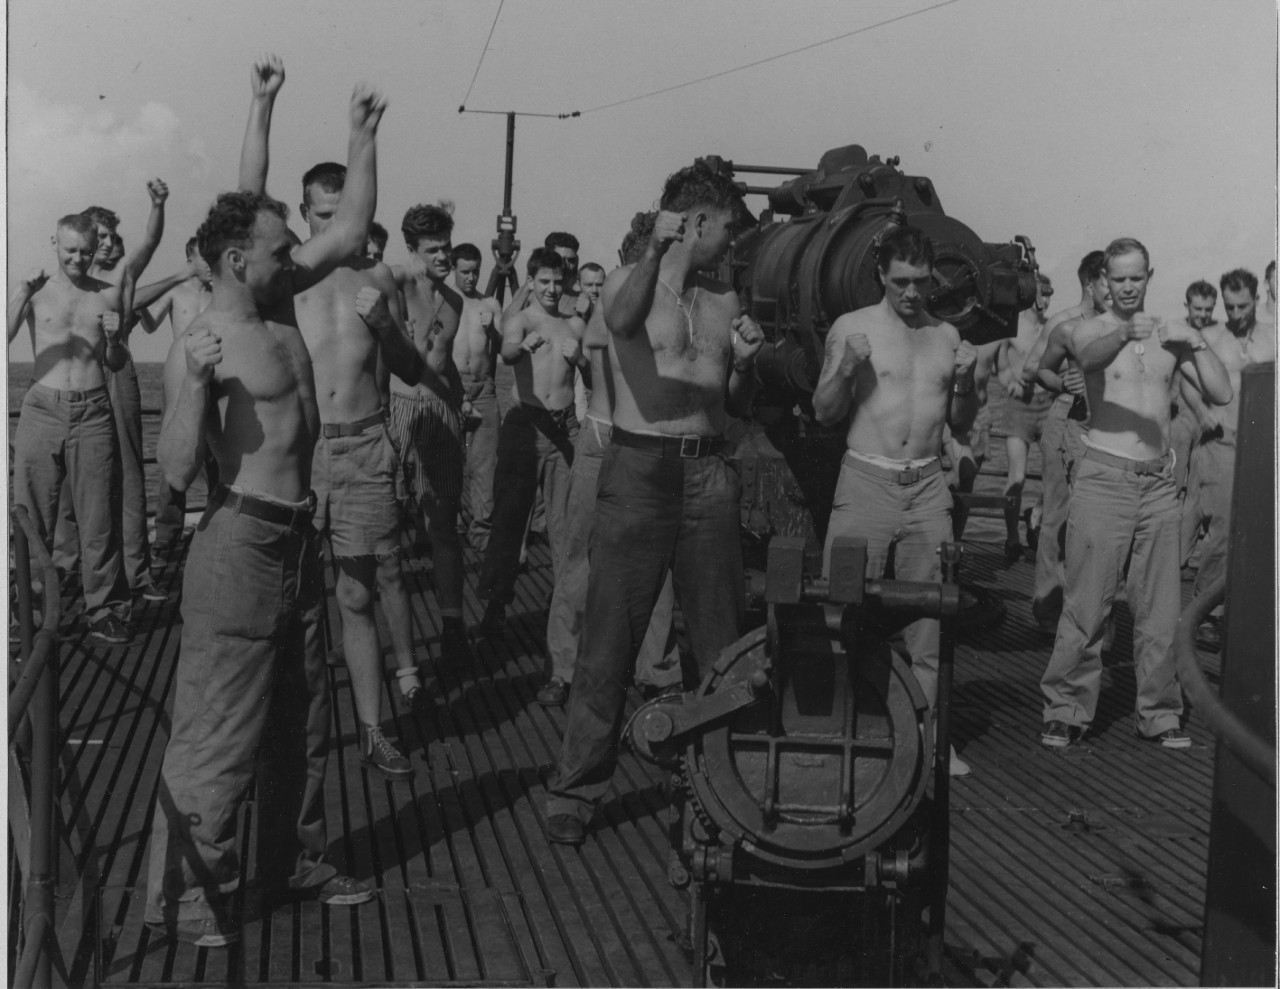 Marine raiders, probably welcoming the chance to be out in fresh air, limber up topside around Nautilus’s forward 6-inch gun during the voyage to the Gilberts, 11 August 1942. Note the tattoed Leatherneck working out to right of center. Sadly, none of these marines are identified. (U.S. Navy Photograph 80-G-28868, National Archives and Records Administration, Still Pictures Division, College Park, Md.)